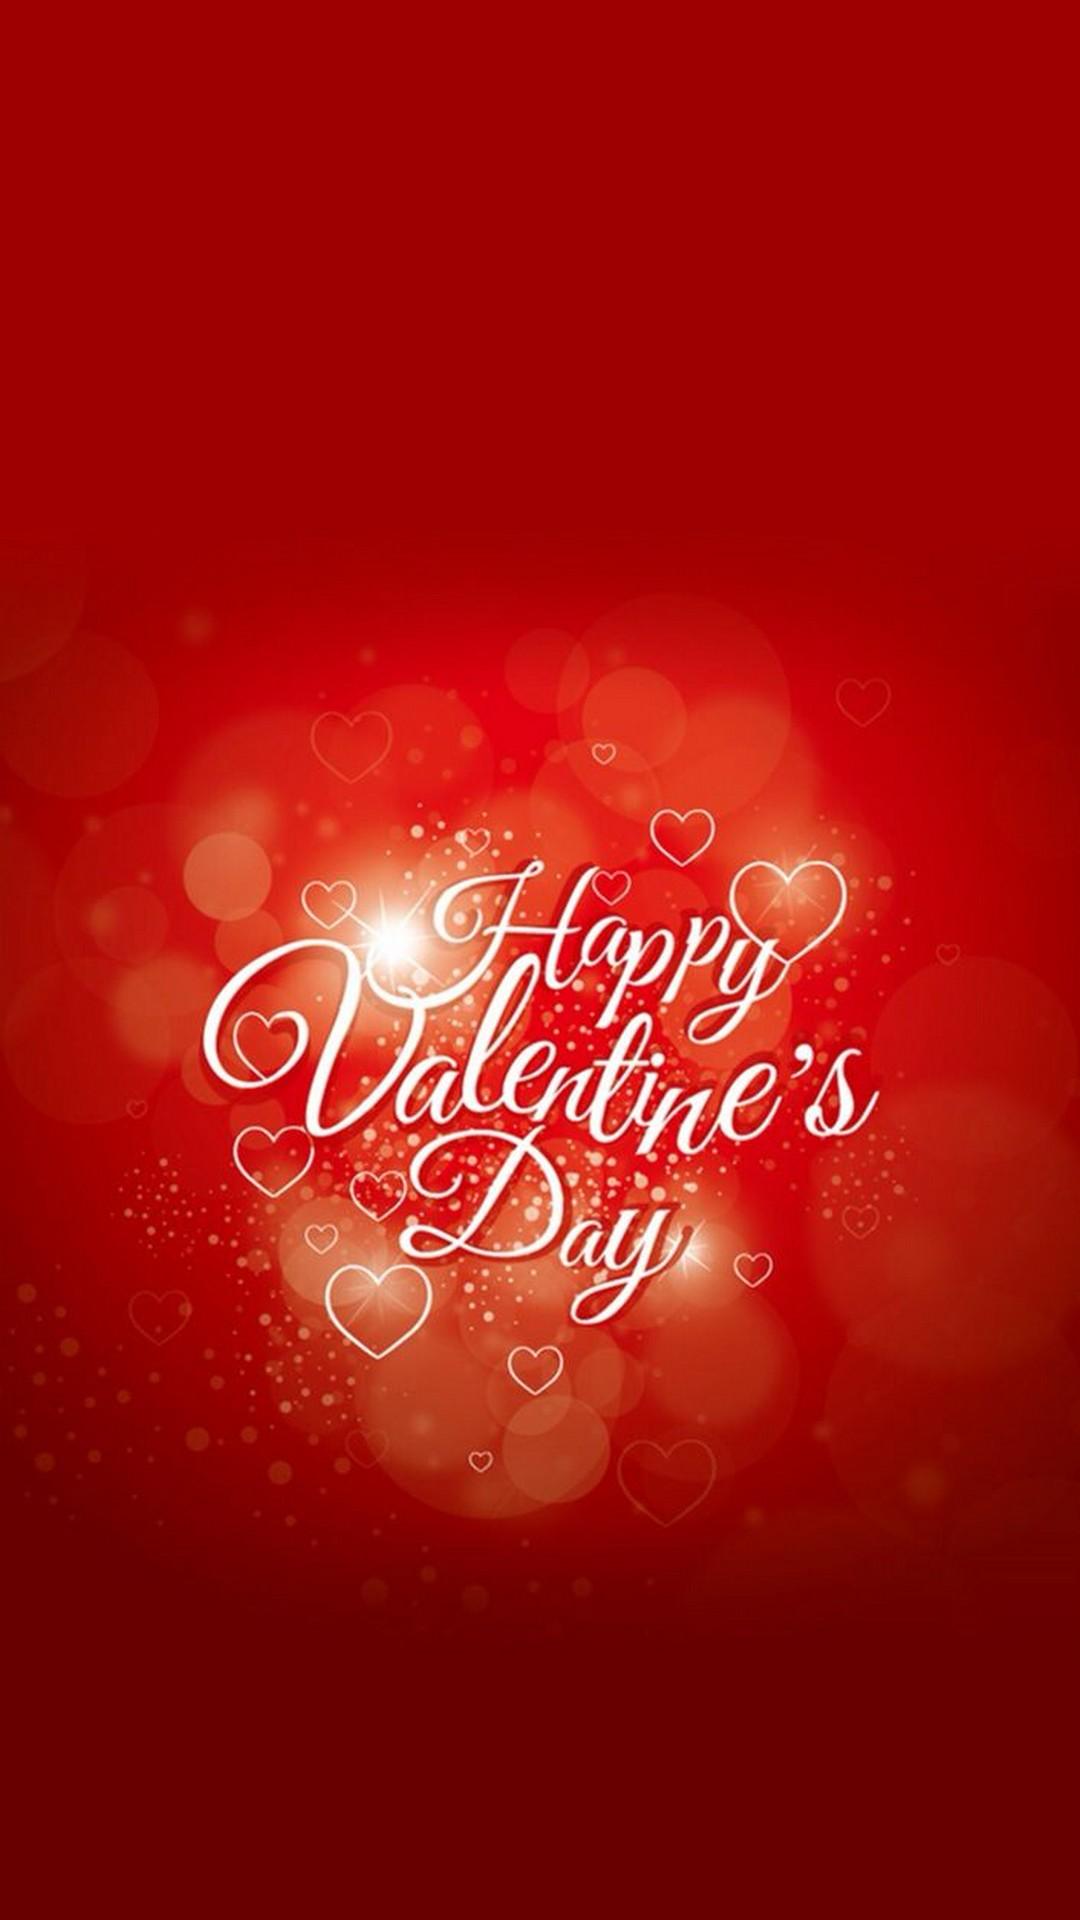 Android Wallpaper HD Happy Valentines Day Image